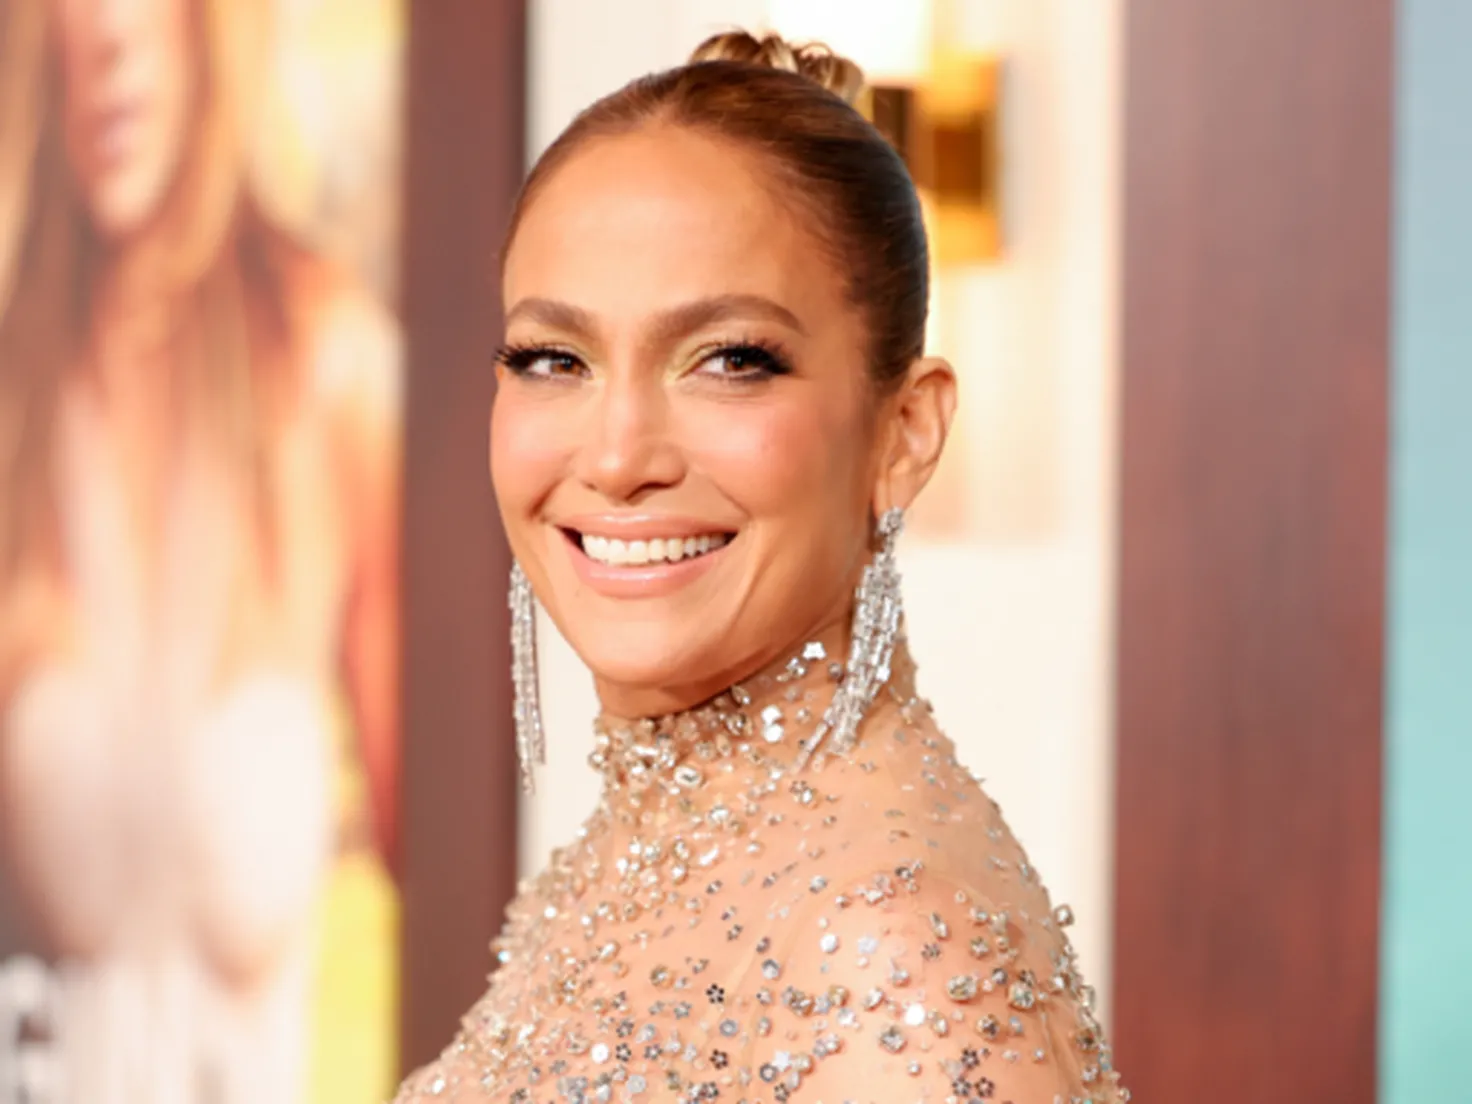 Ranking reveals the most-searched J.Lo rom-com movies in Texas